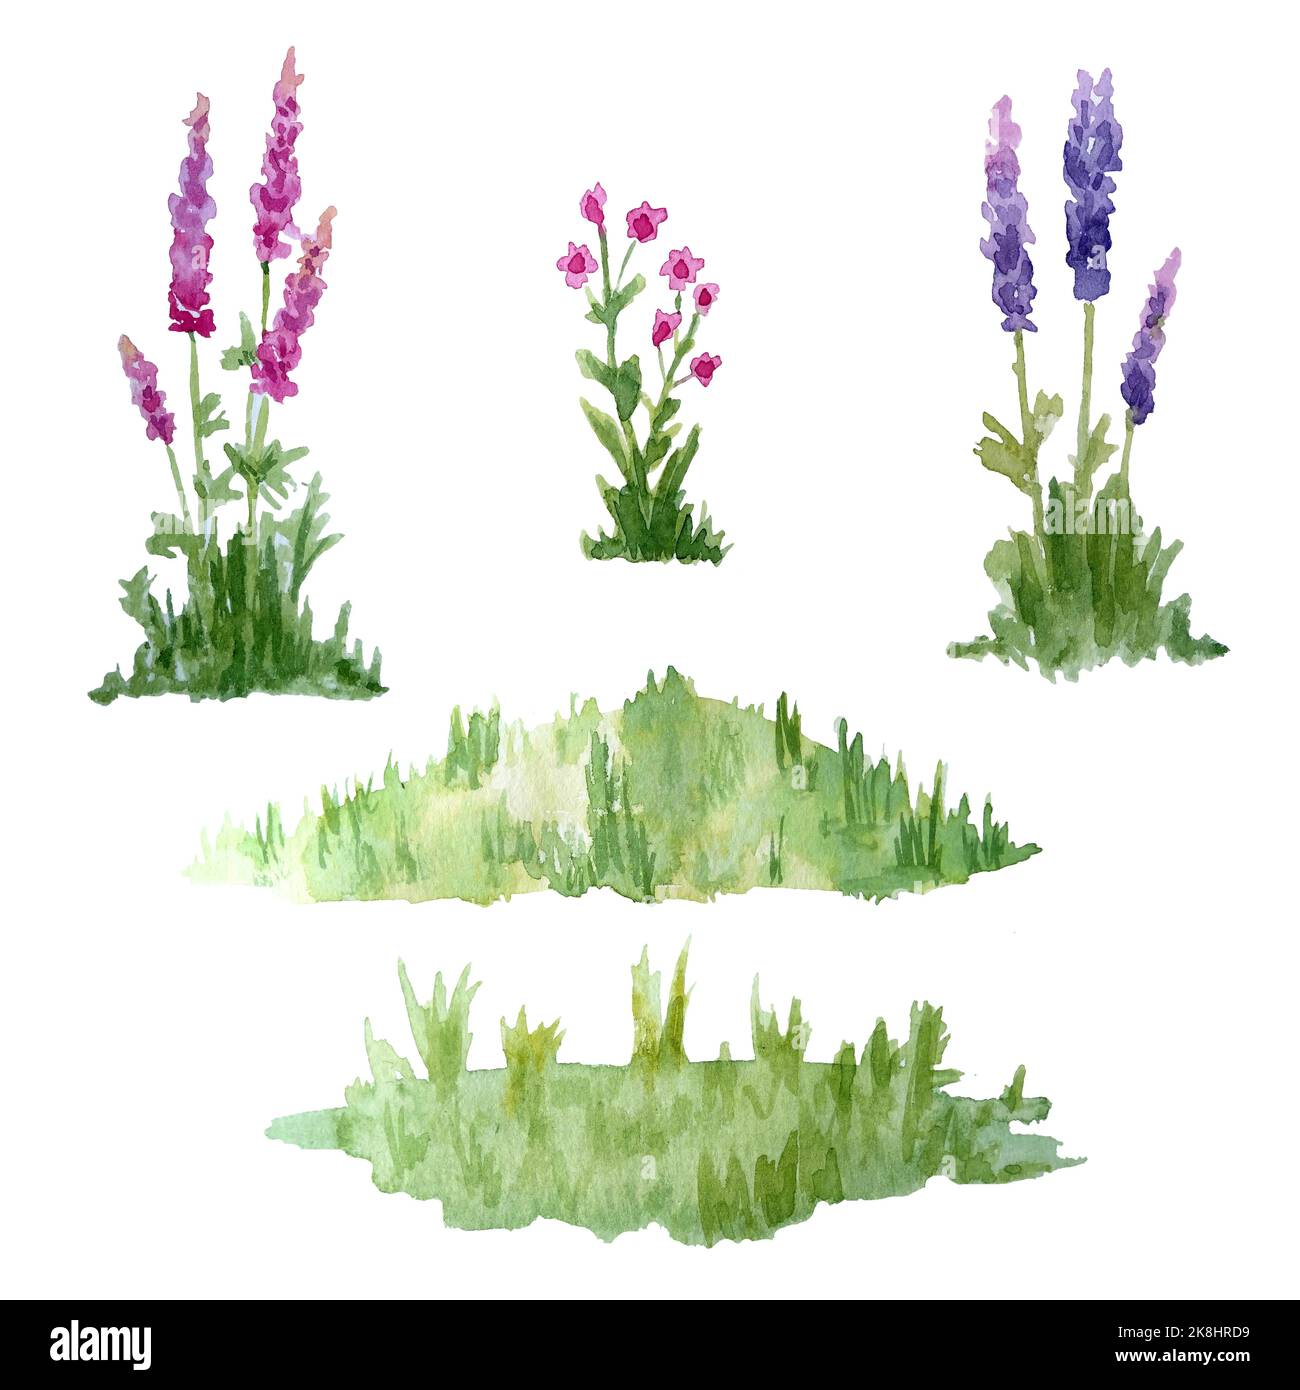 Watercolor hand drawn forest wildgreen grass flowers. Eco Natural organic ecological illustration for healthy labels packaging. Bright blades of grass meadow plants. Fresh vegetation isolated on white Stock Photo